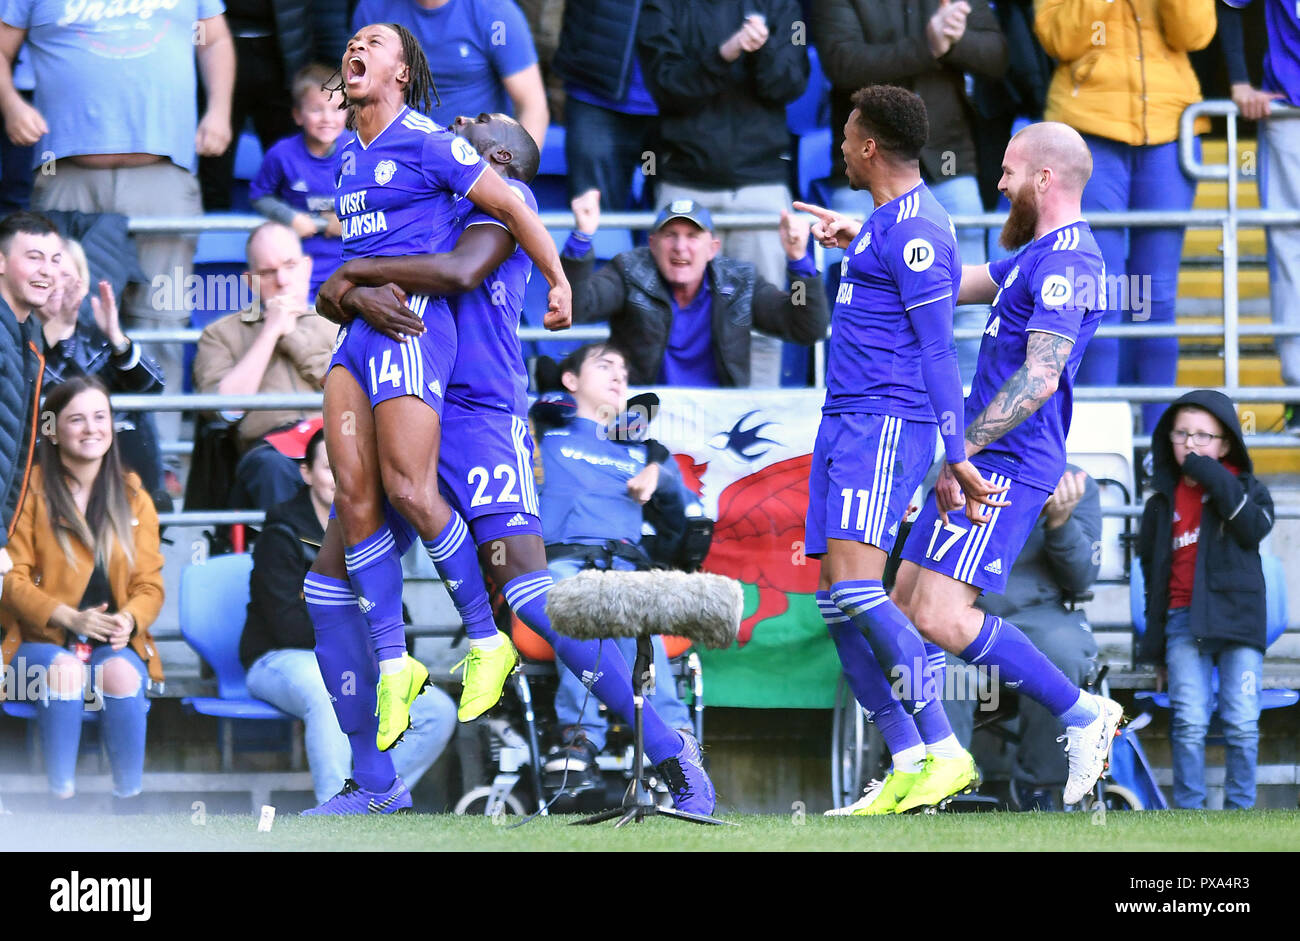 Cardiff City's Bobby Reid (left) celebrates scoring his side's second goal  of the game with team-mates Souleymane Bamba (second left), Josh Murphy,  and Aron Gunnarsson (right) during the Premier League match at